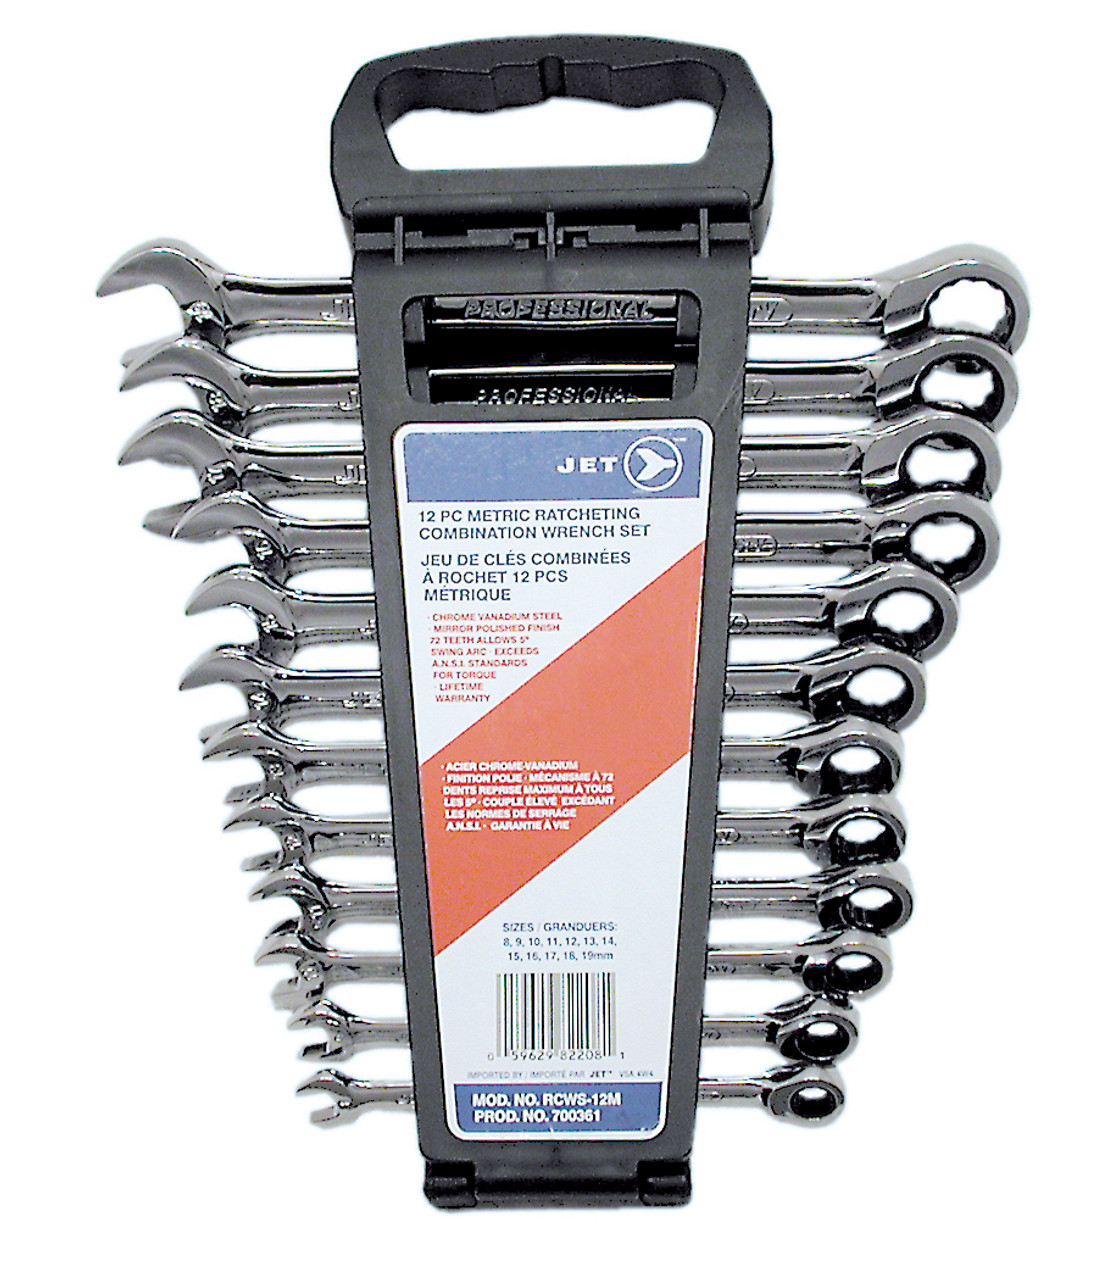 12 Pc. Metric Ratcheting Combination Wrench Set 700361